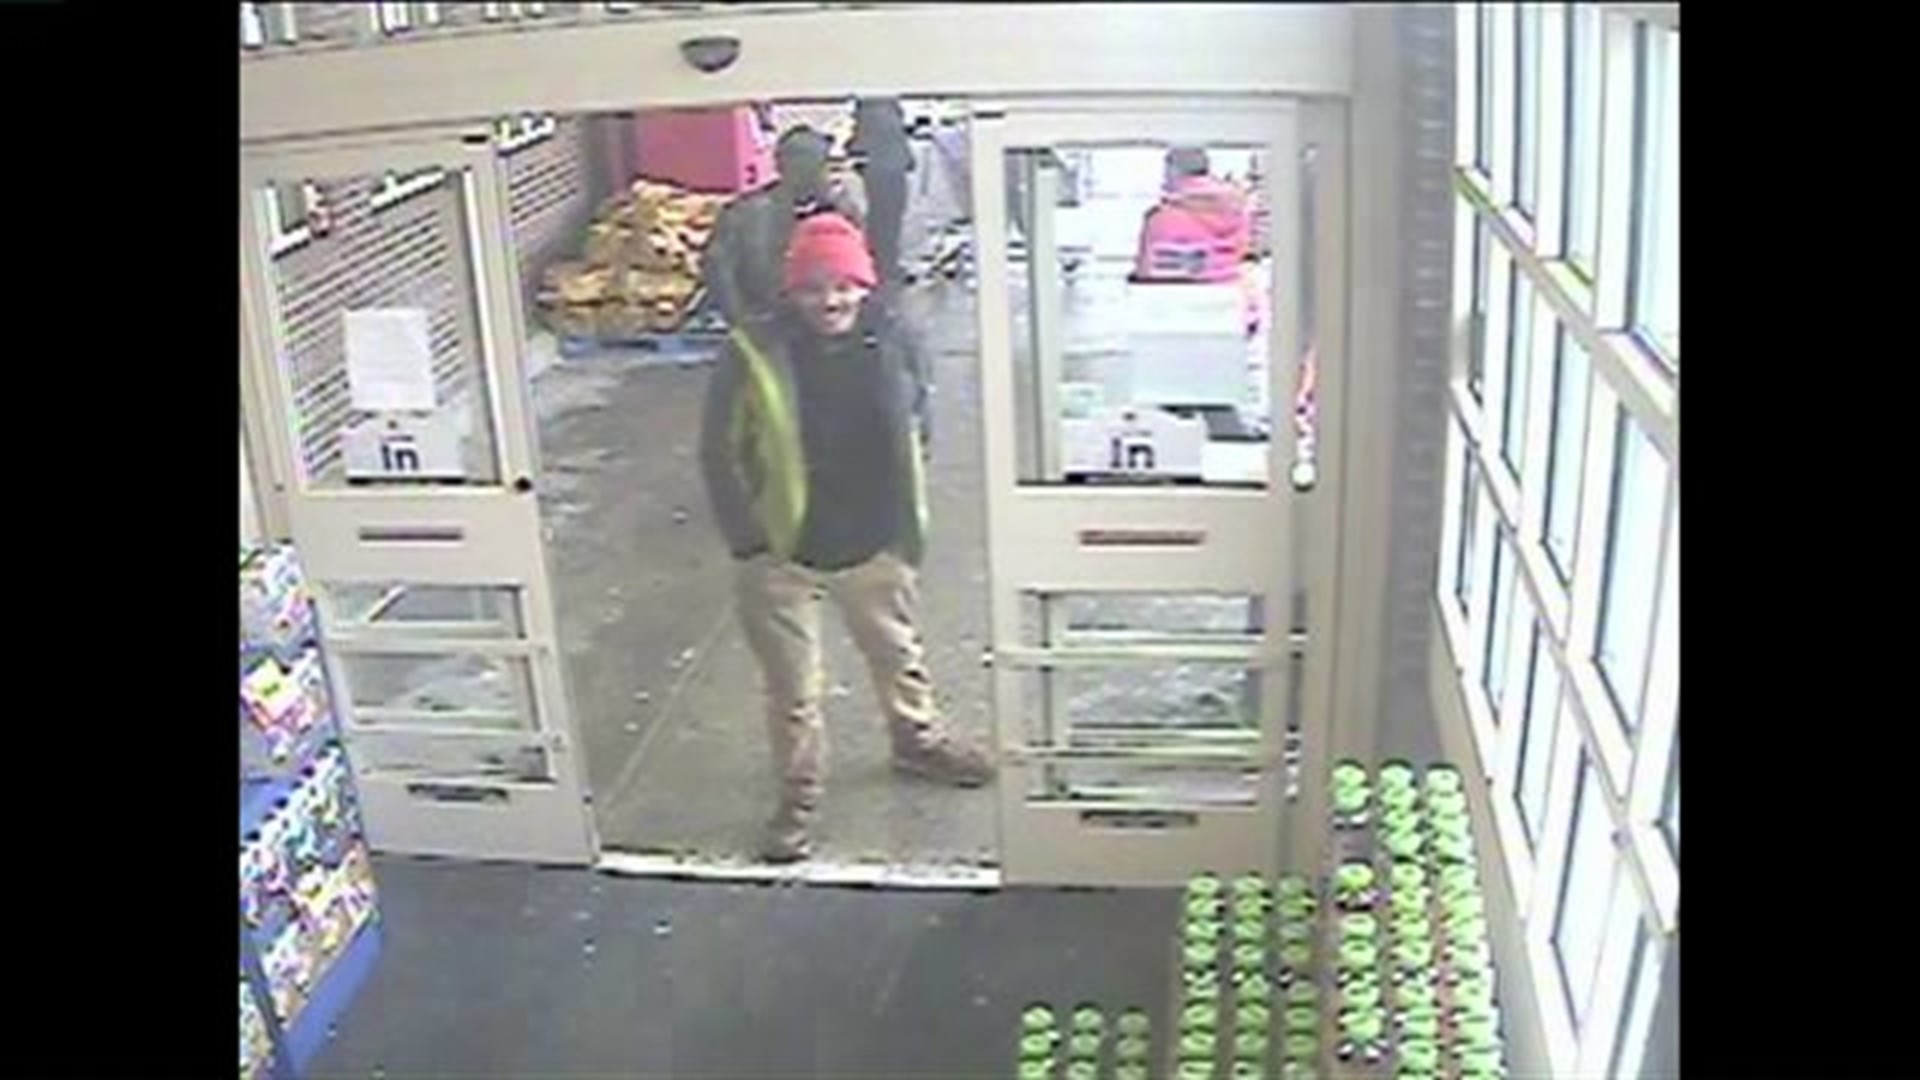 Police searching for suspects in Meriden Stop & Shop assault